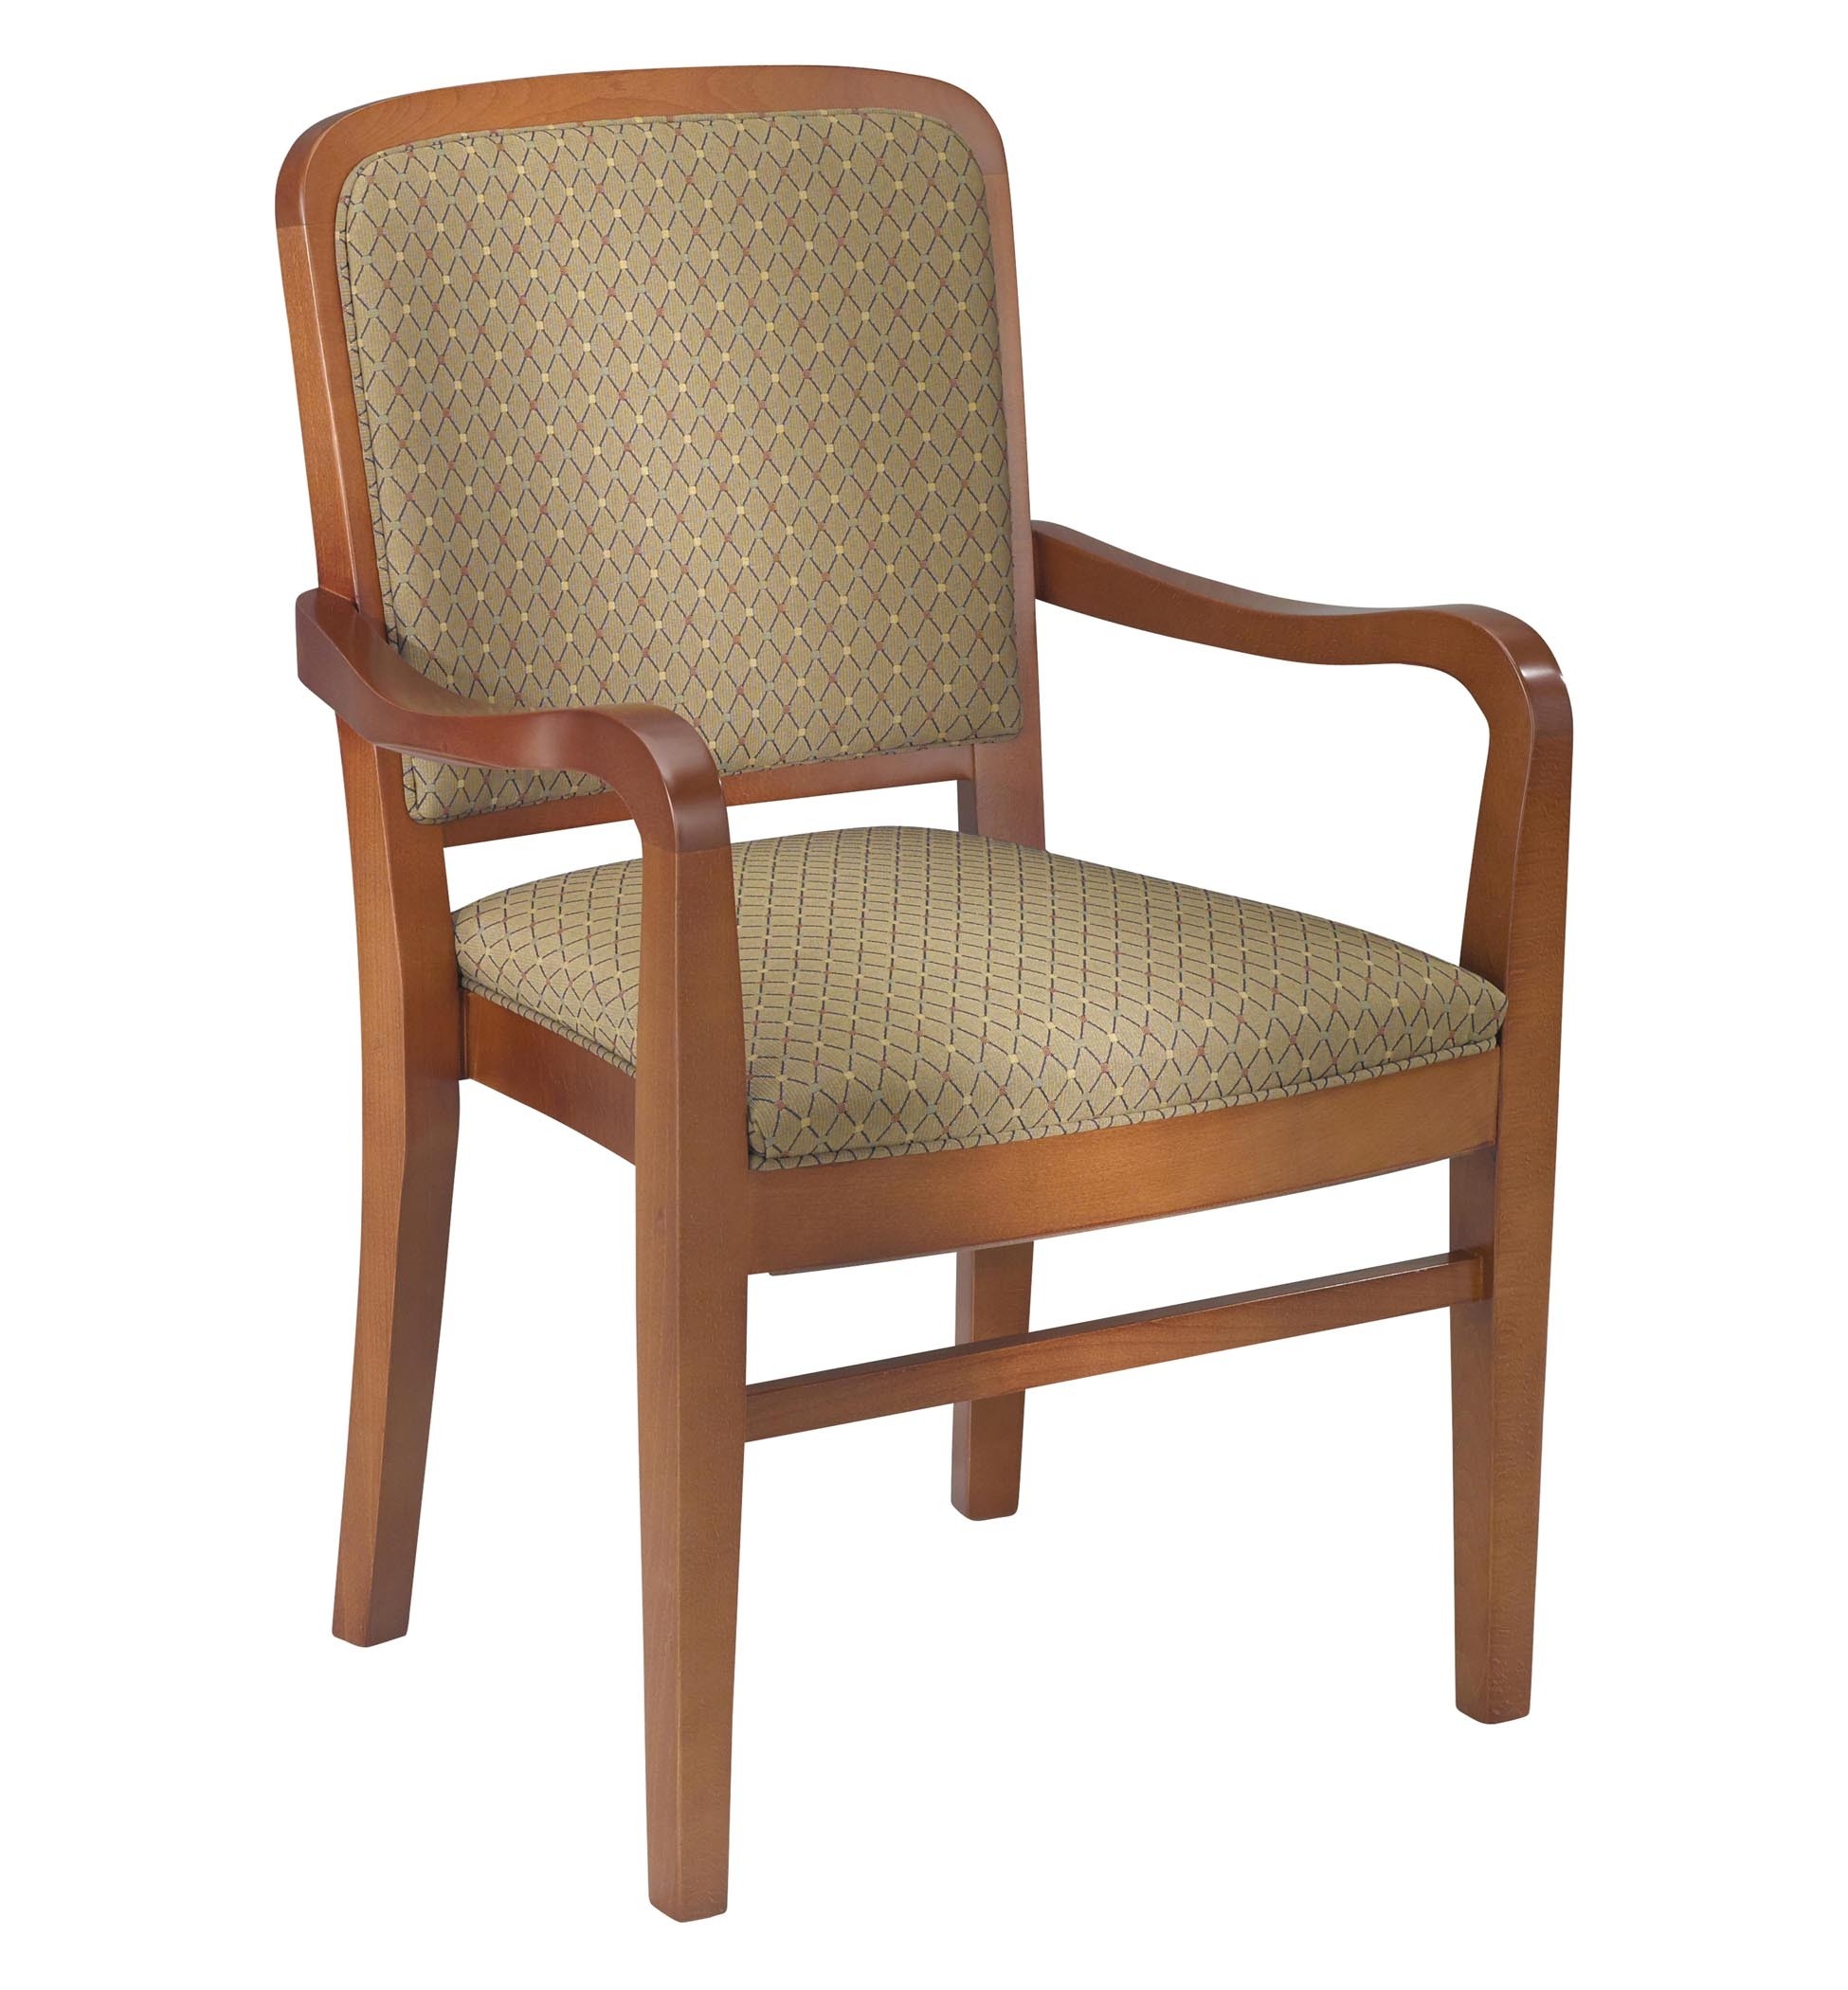 Wooden chairs with armswood chairs stacking wood arm chair stack